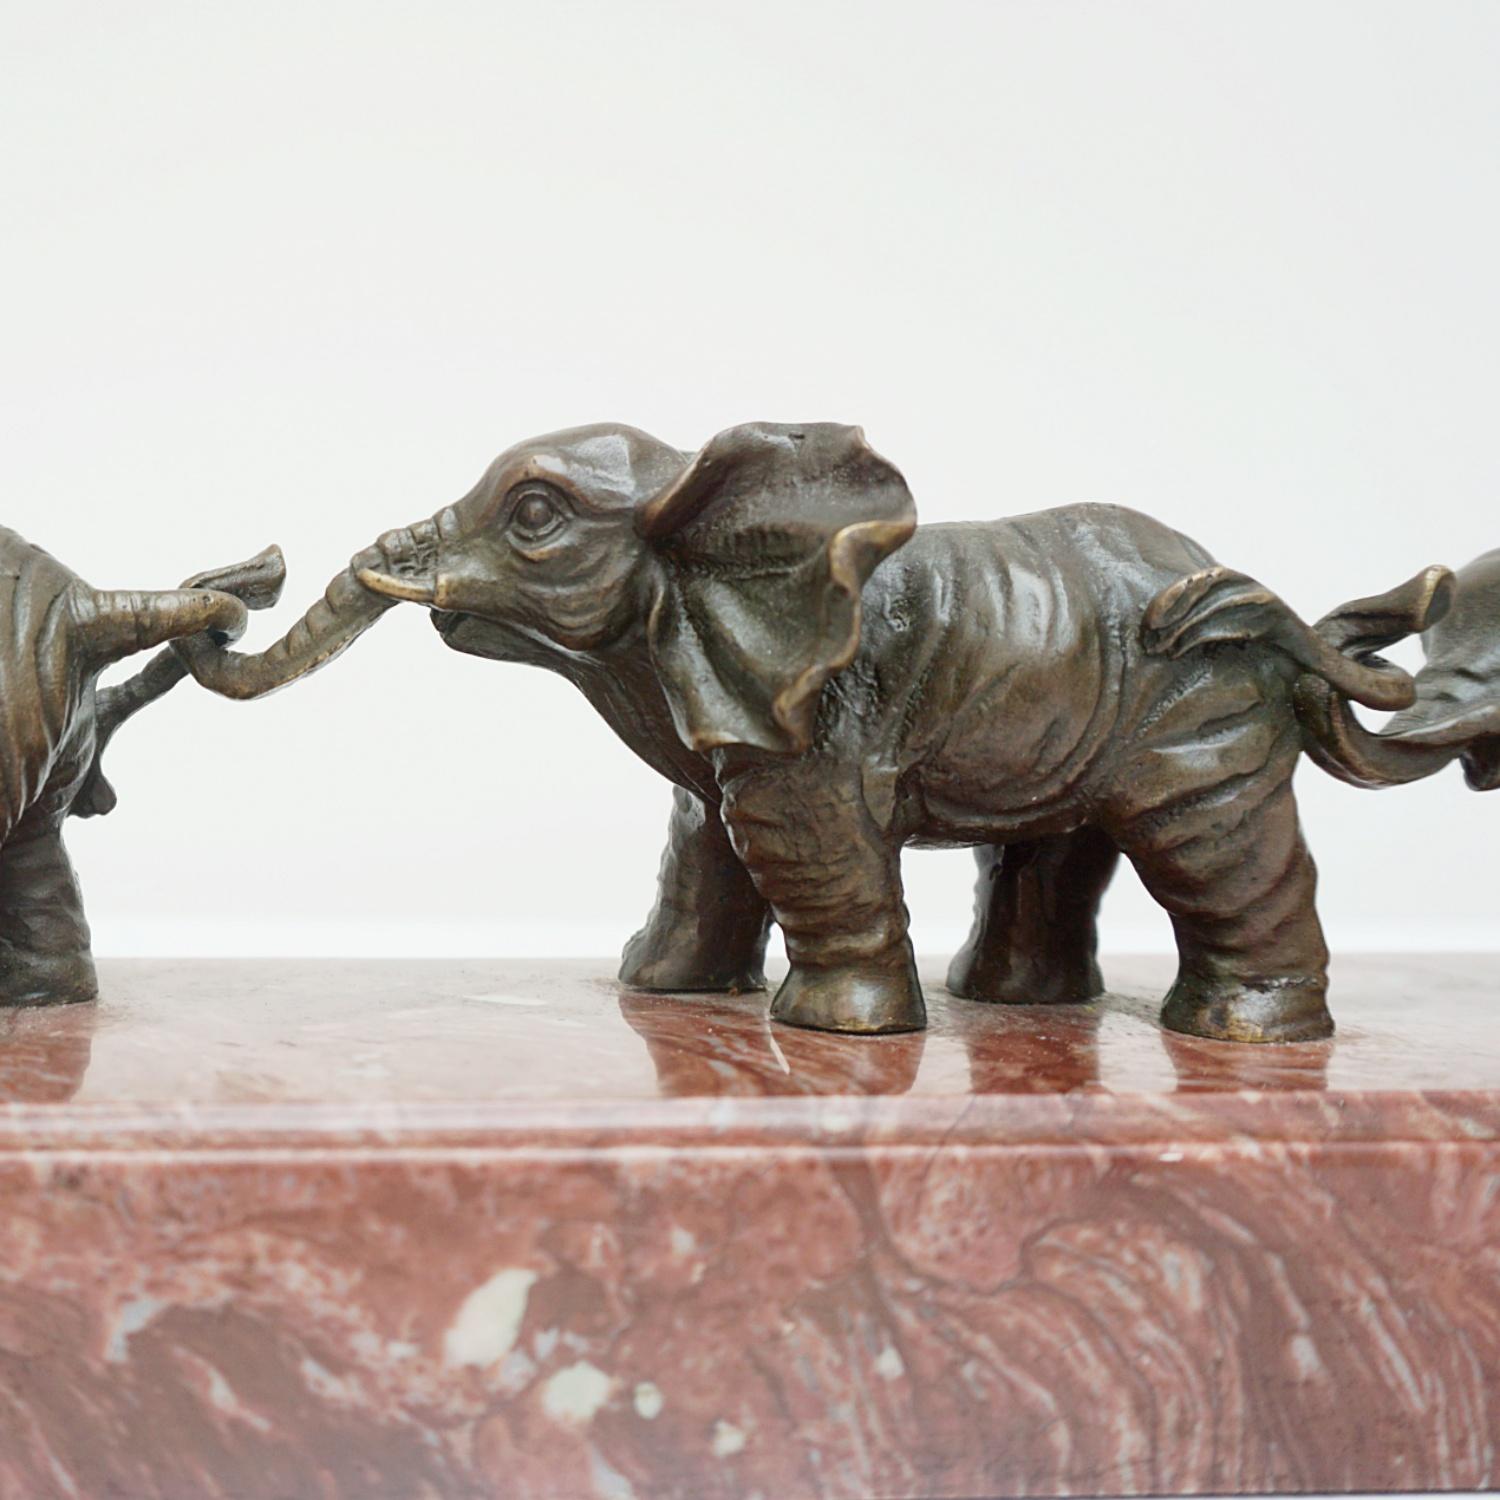 A Contemporary bronze sculpture of a line of playful elephants, connected by their trunks and tails. The elephants growing in size with the largest Elephant at the head of the herd. Set on a marble base. Added signature 'E. Barillot' to marble base.